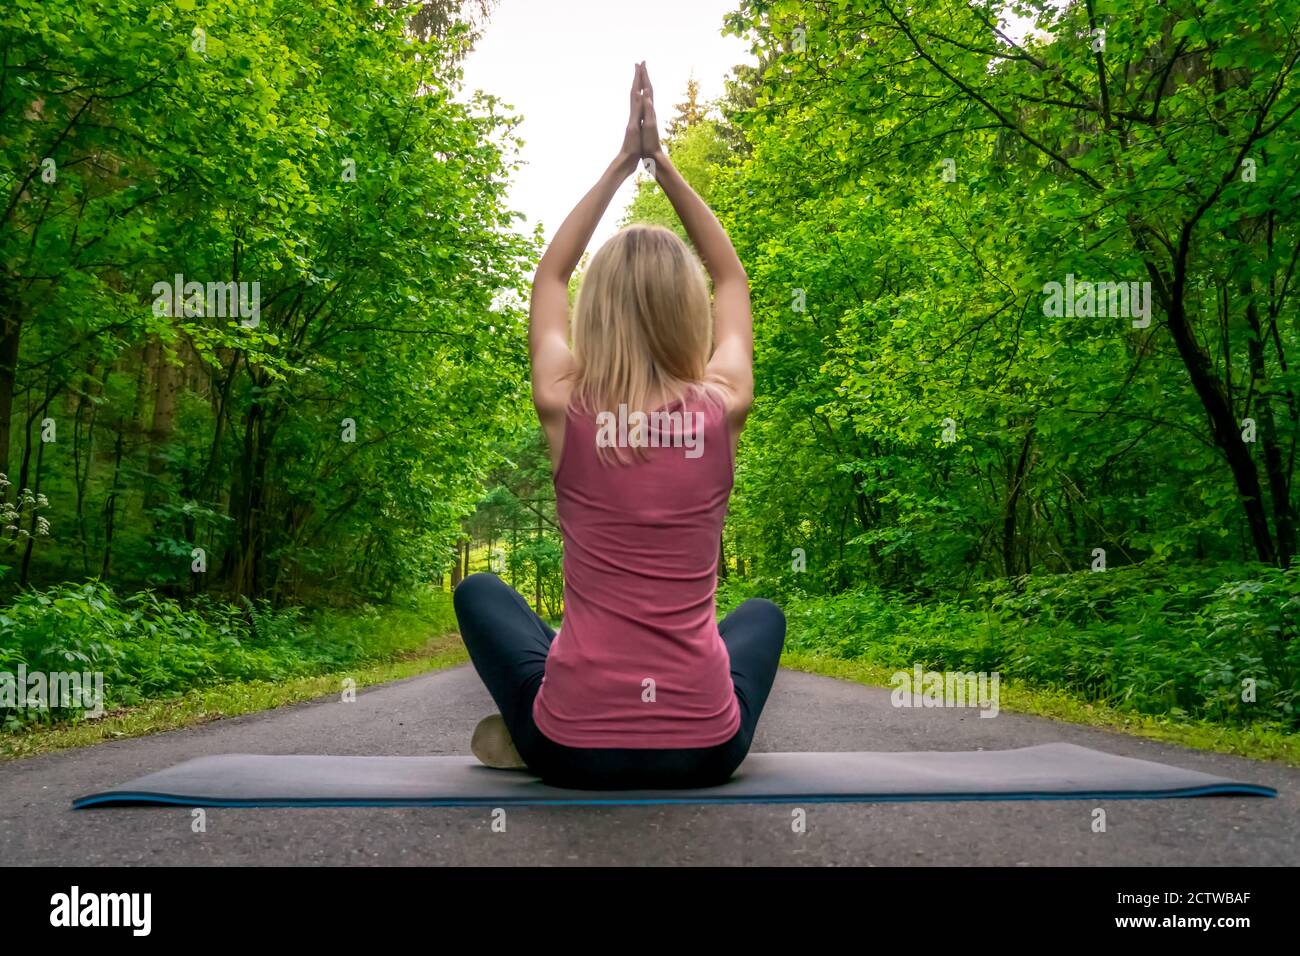 Young slim woman with blonde hair sitting on the yoga mat in